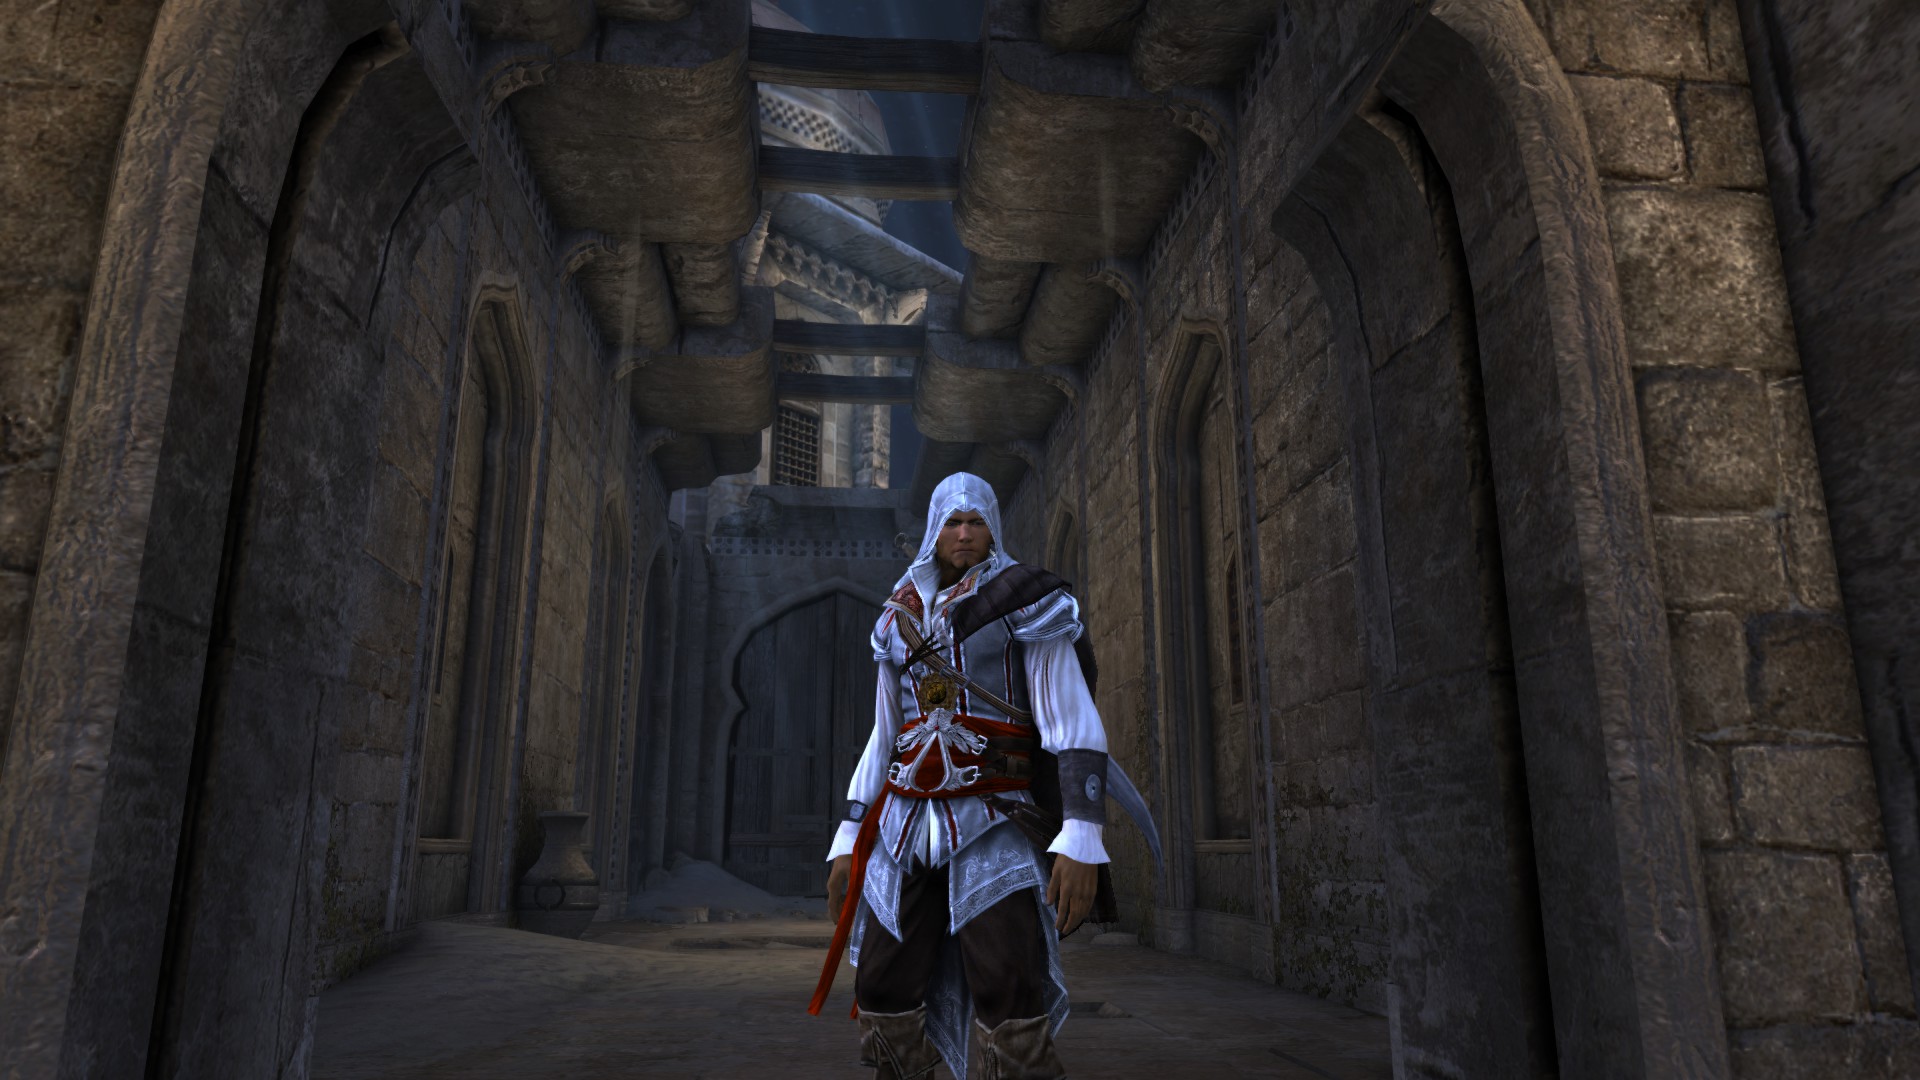 a man dressed in medieval clothing and a white hood stands among stone archways